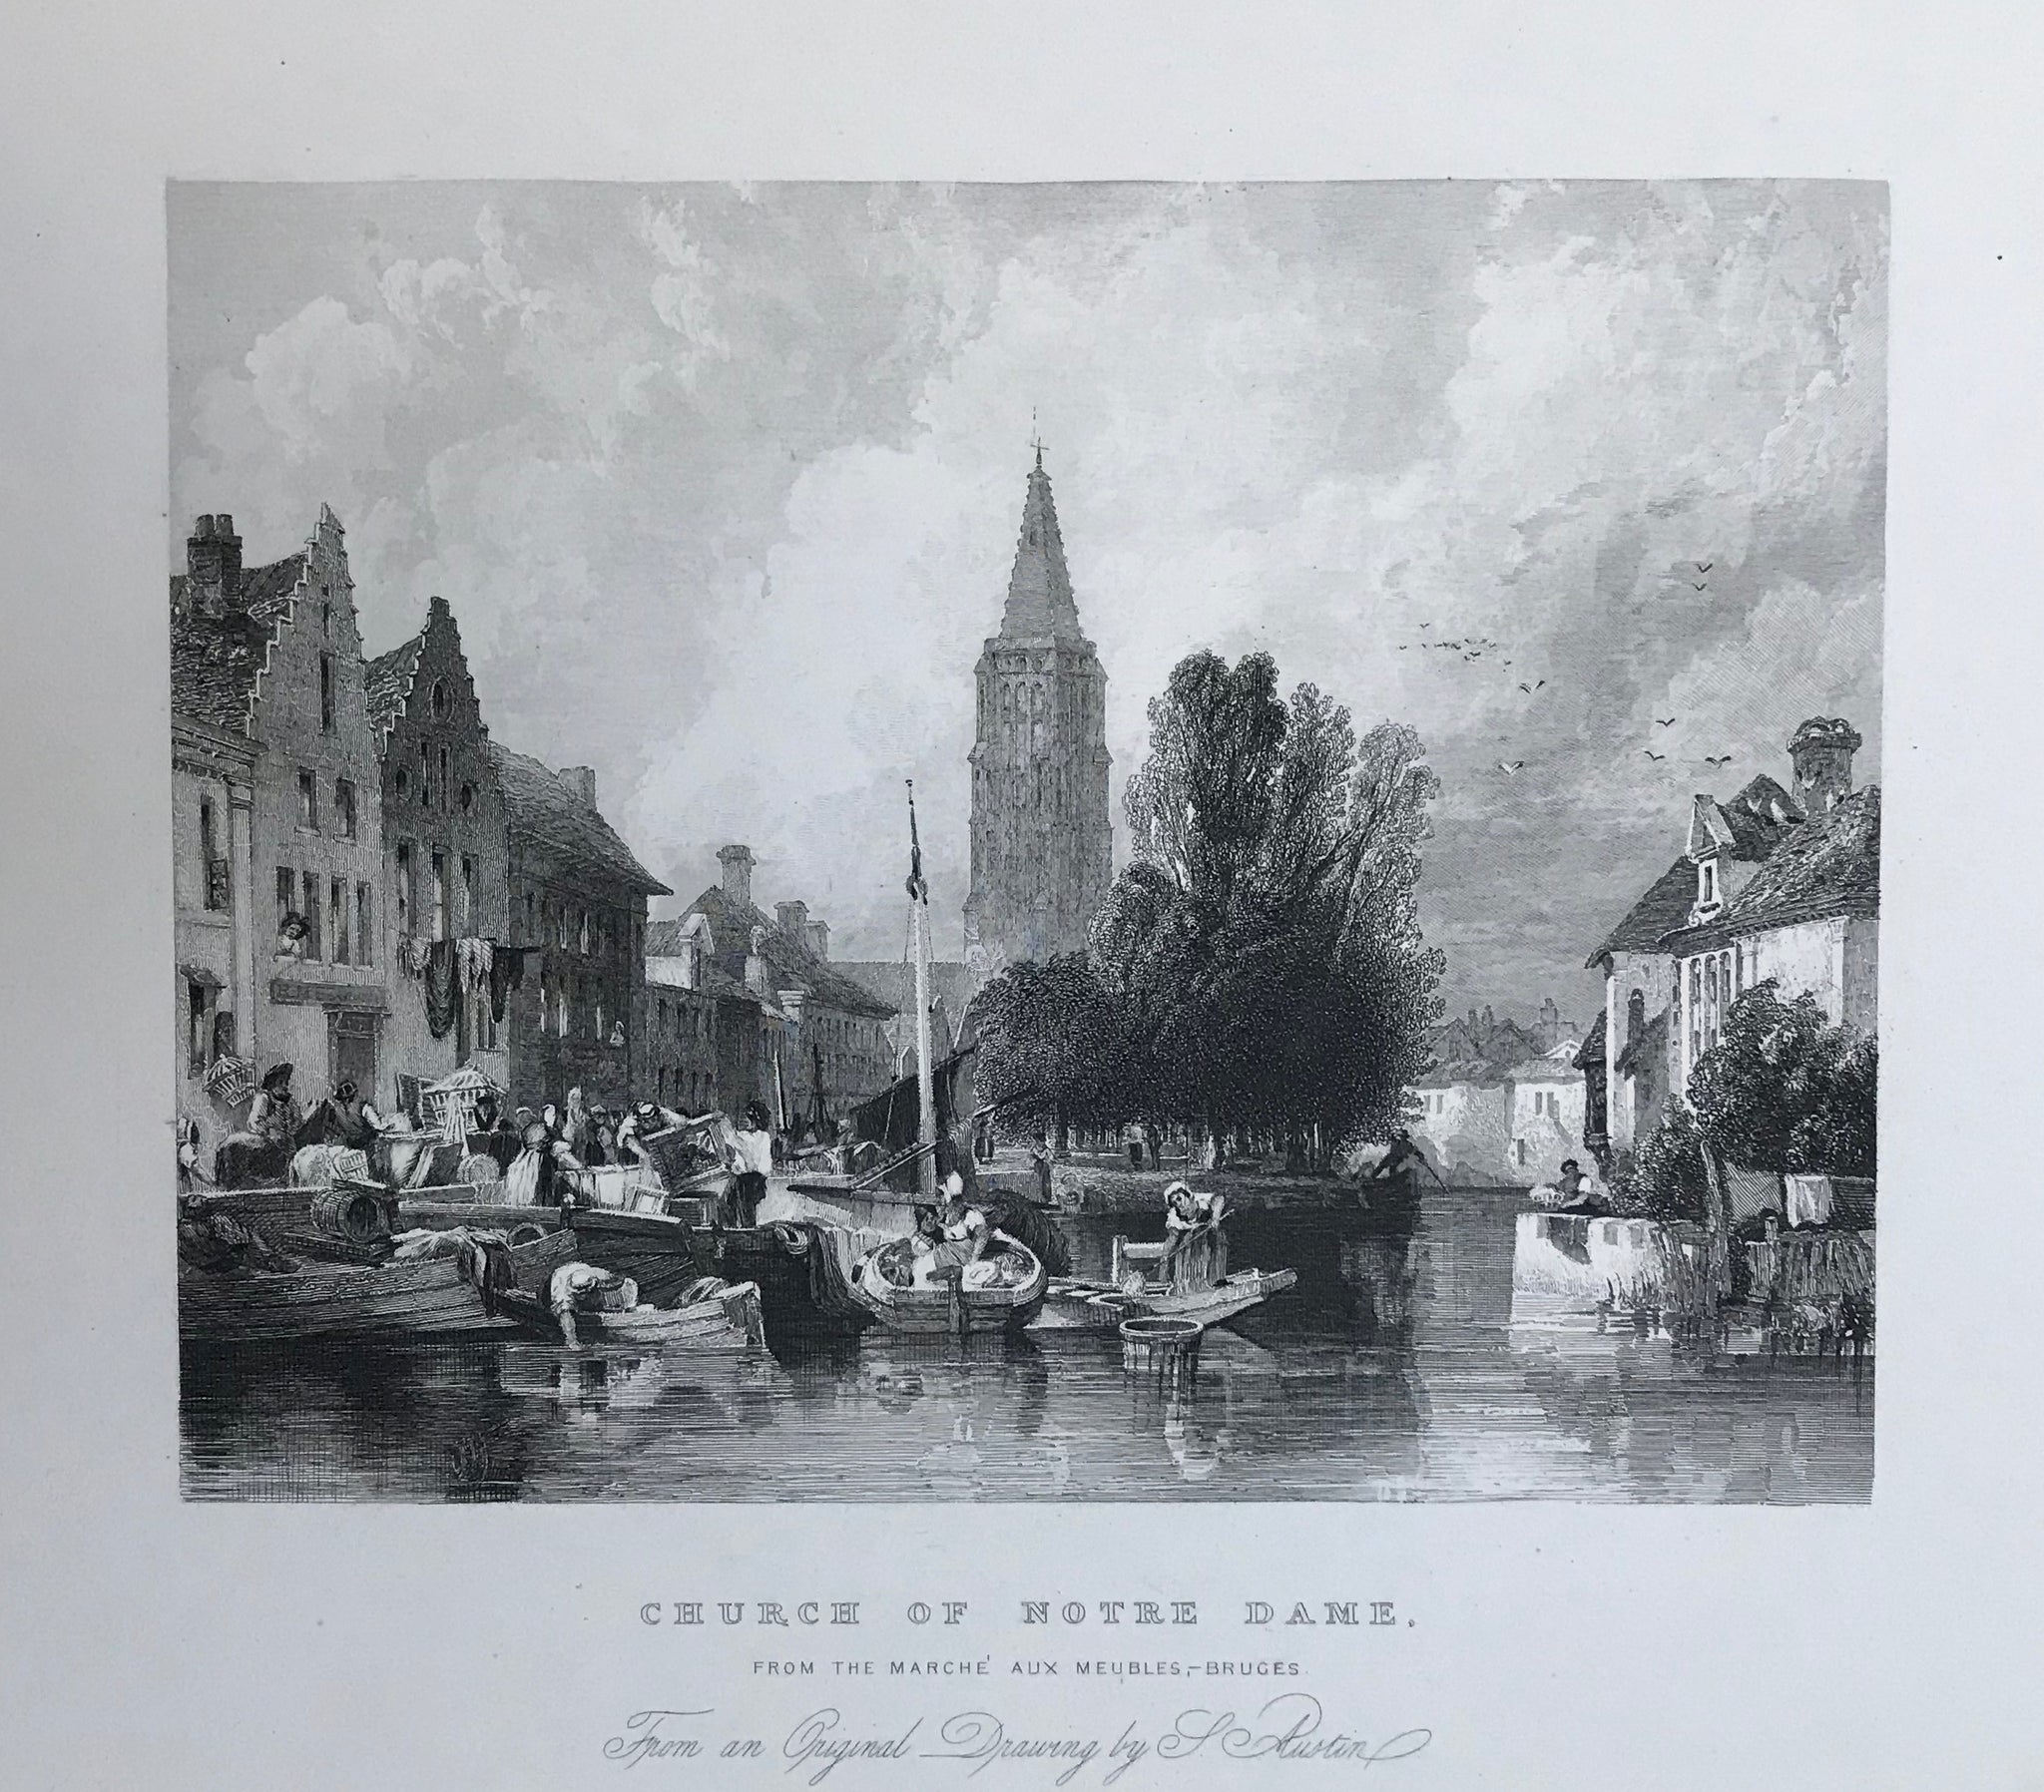 Church of Notre Dame From the Marche aux Meubles-Bruges  Steel engraving by J. Henshall after S. Austin ca 1845. Print has overall very light age toning.